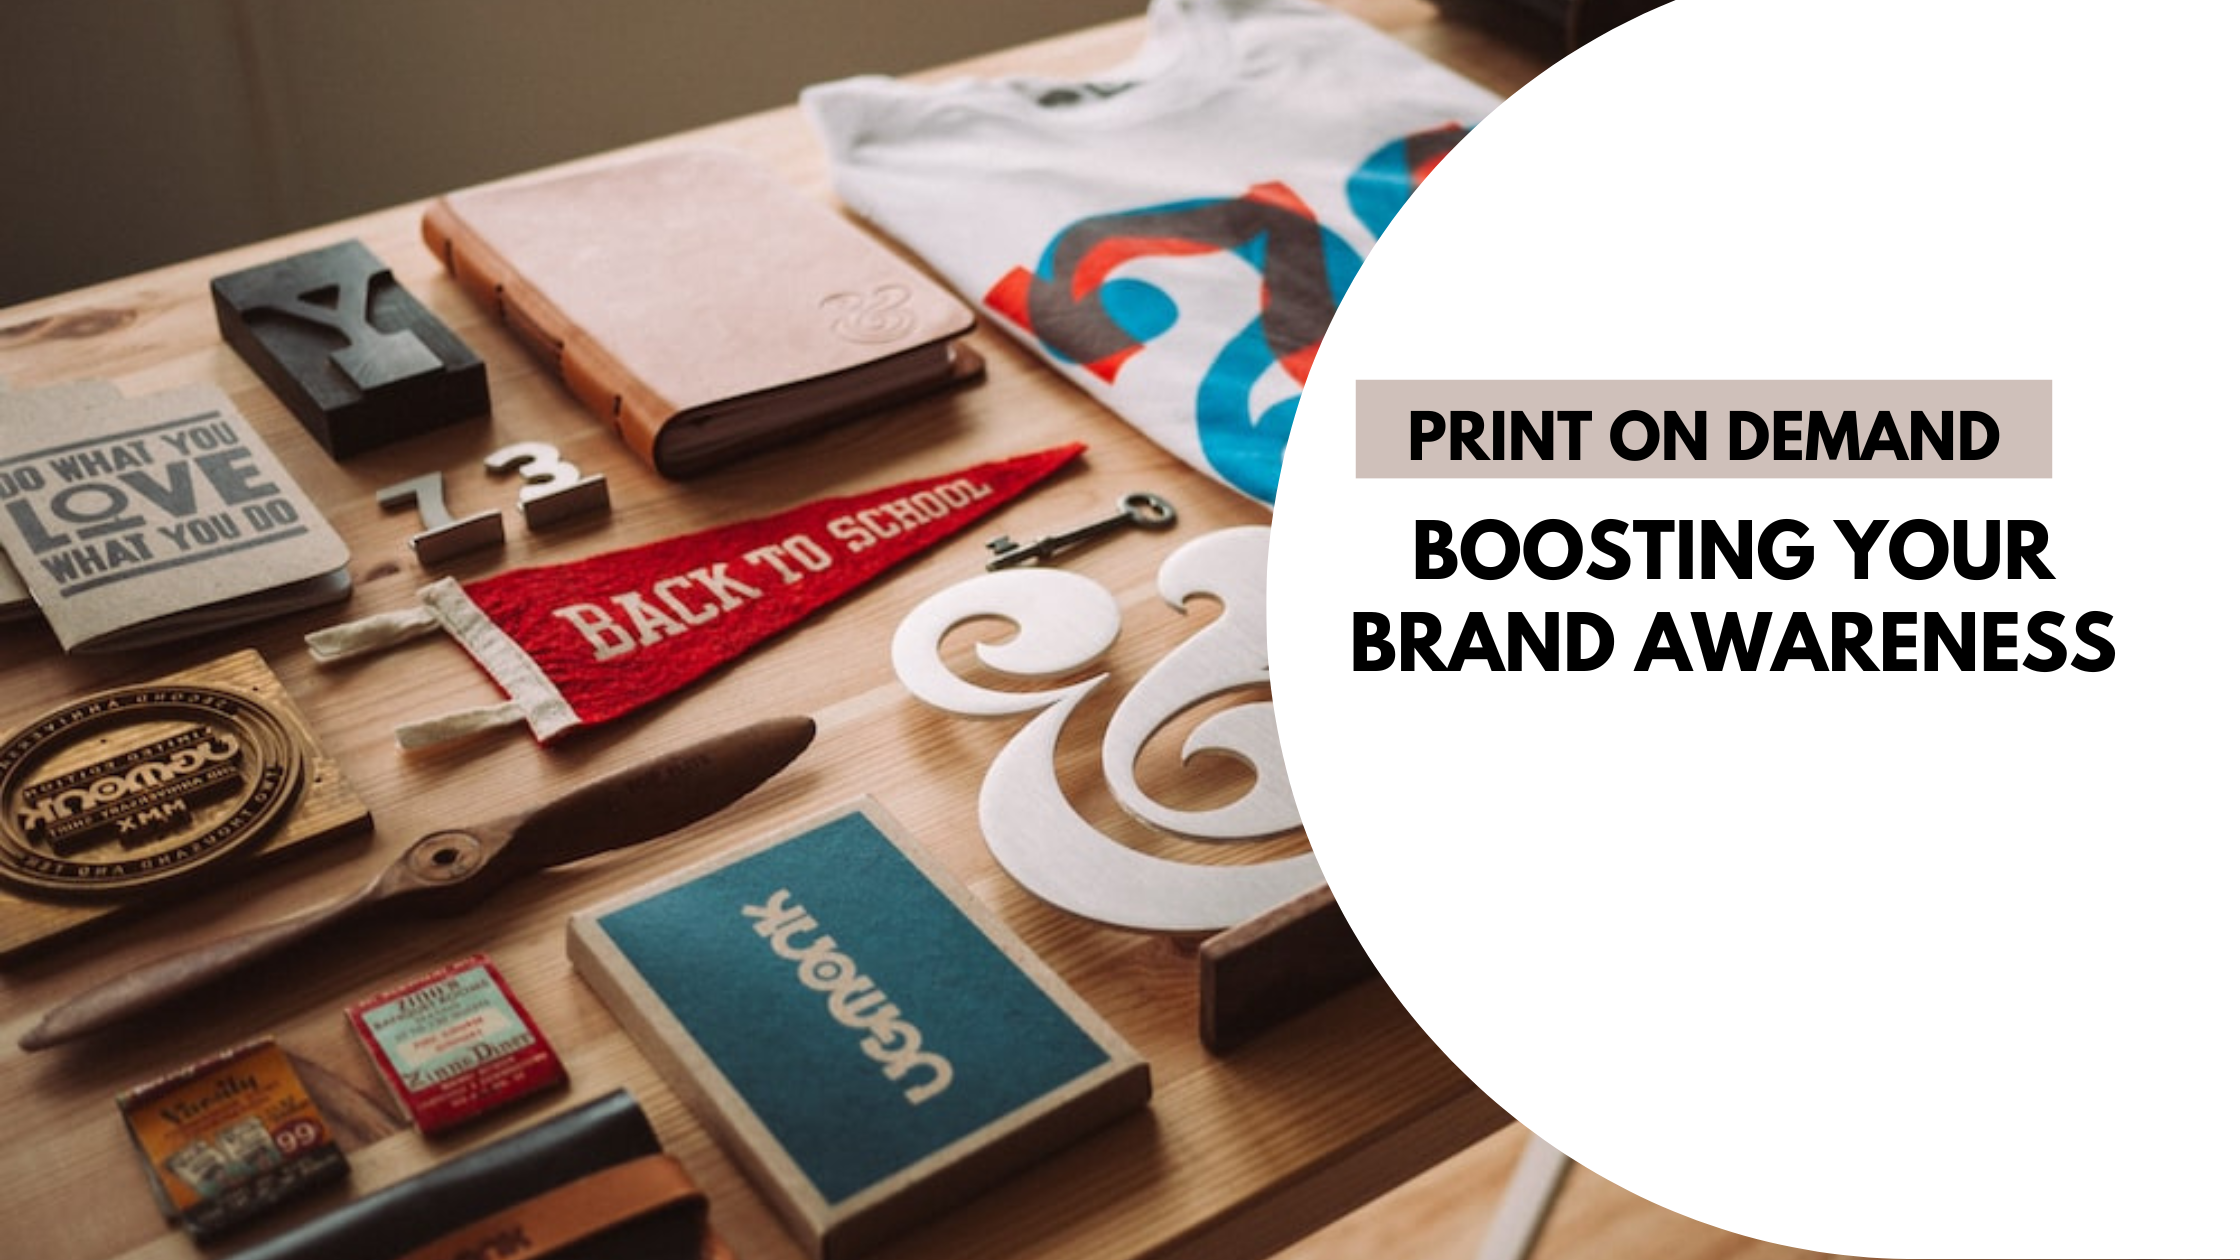 Boosting Your Brand Awareness with Print on Demand